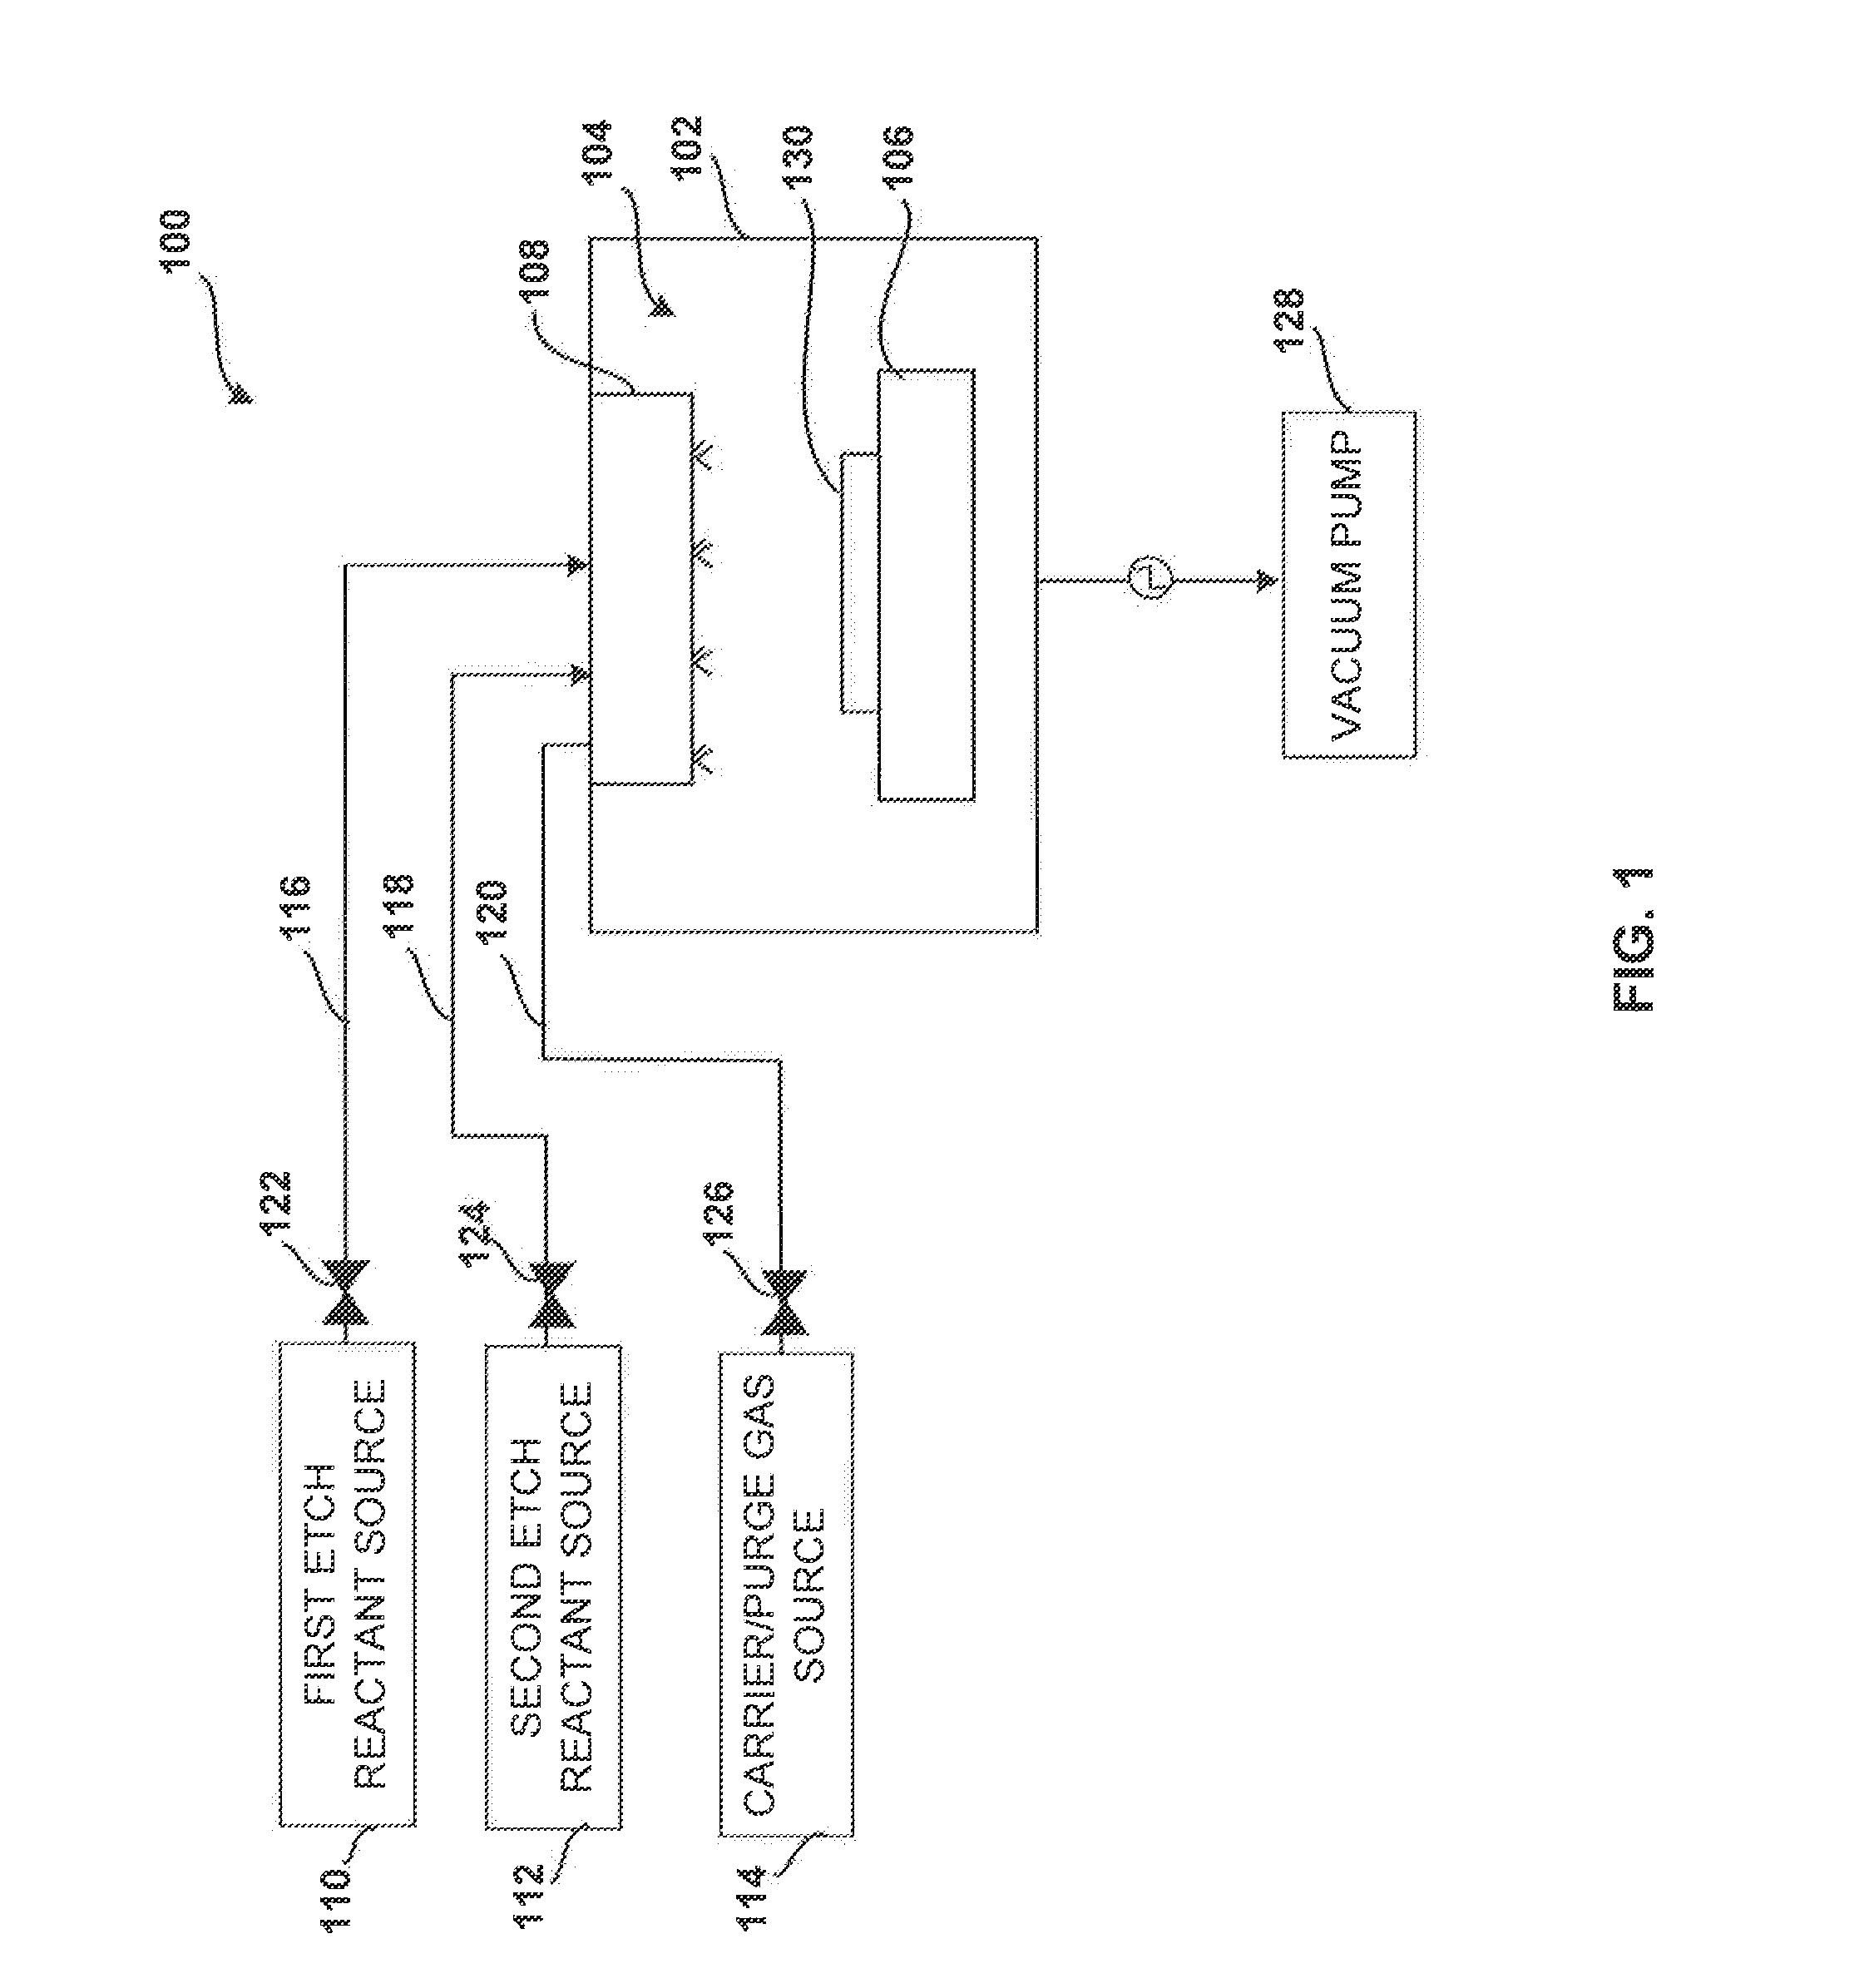 Multi-step method and apparatus for etching compounds containing a metal